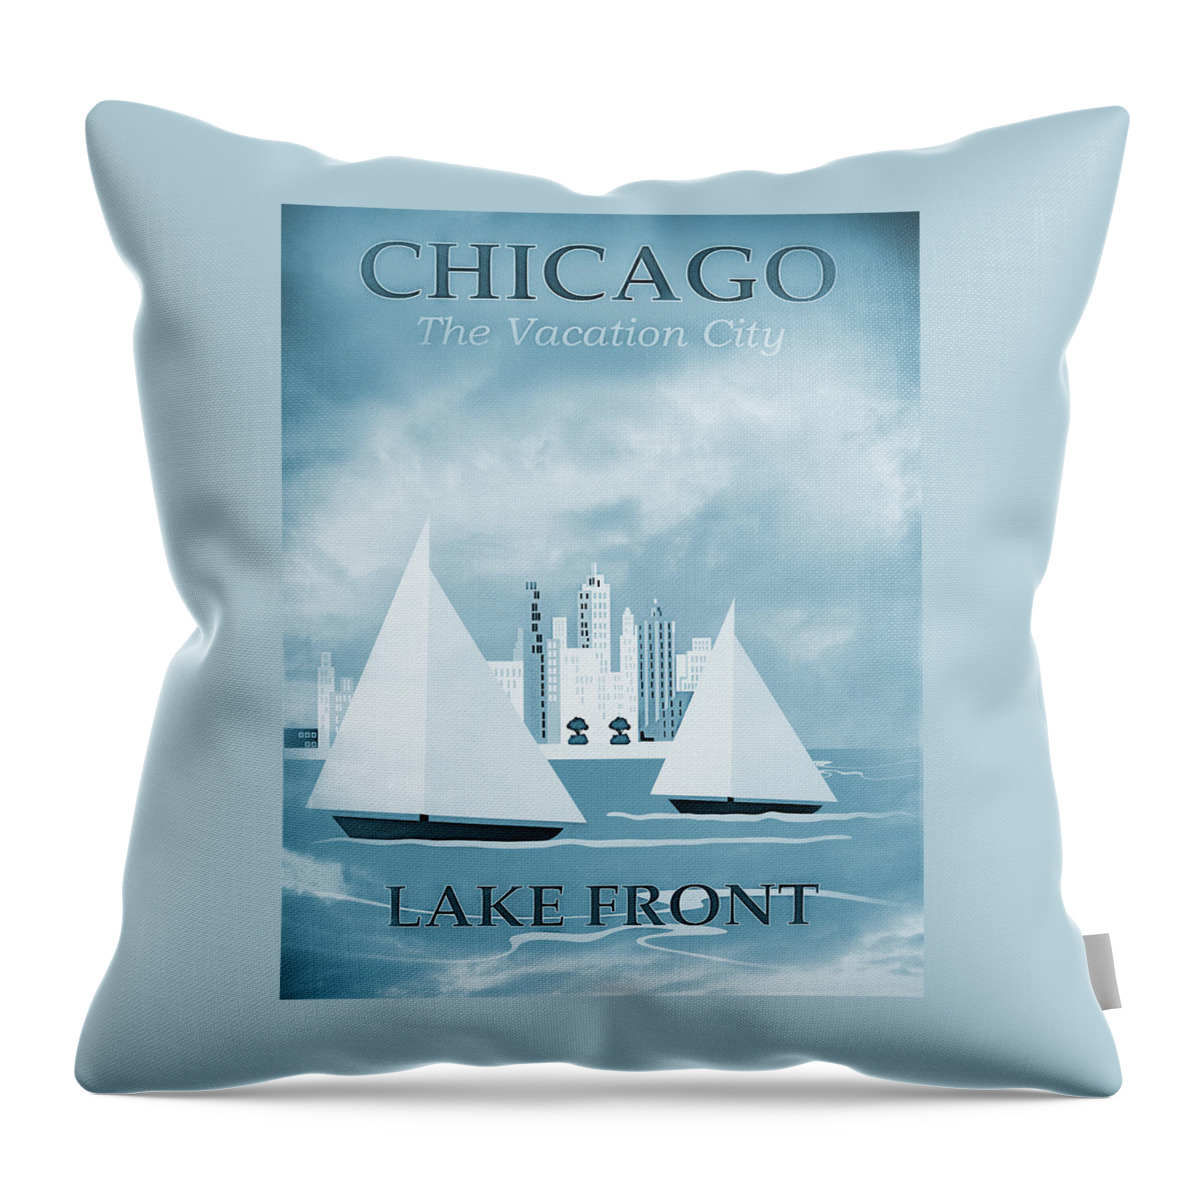 Chicago Throw Pillow featuring the photograph Vintage Travel Chicago Lakefront Sea Blues by Carol Japp